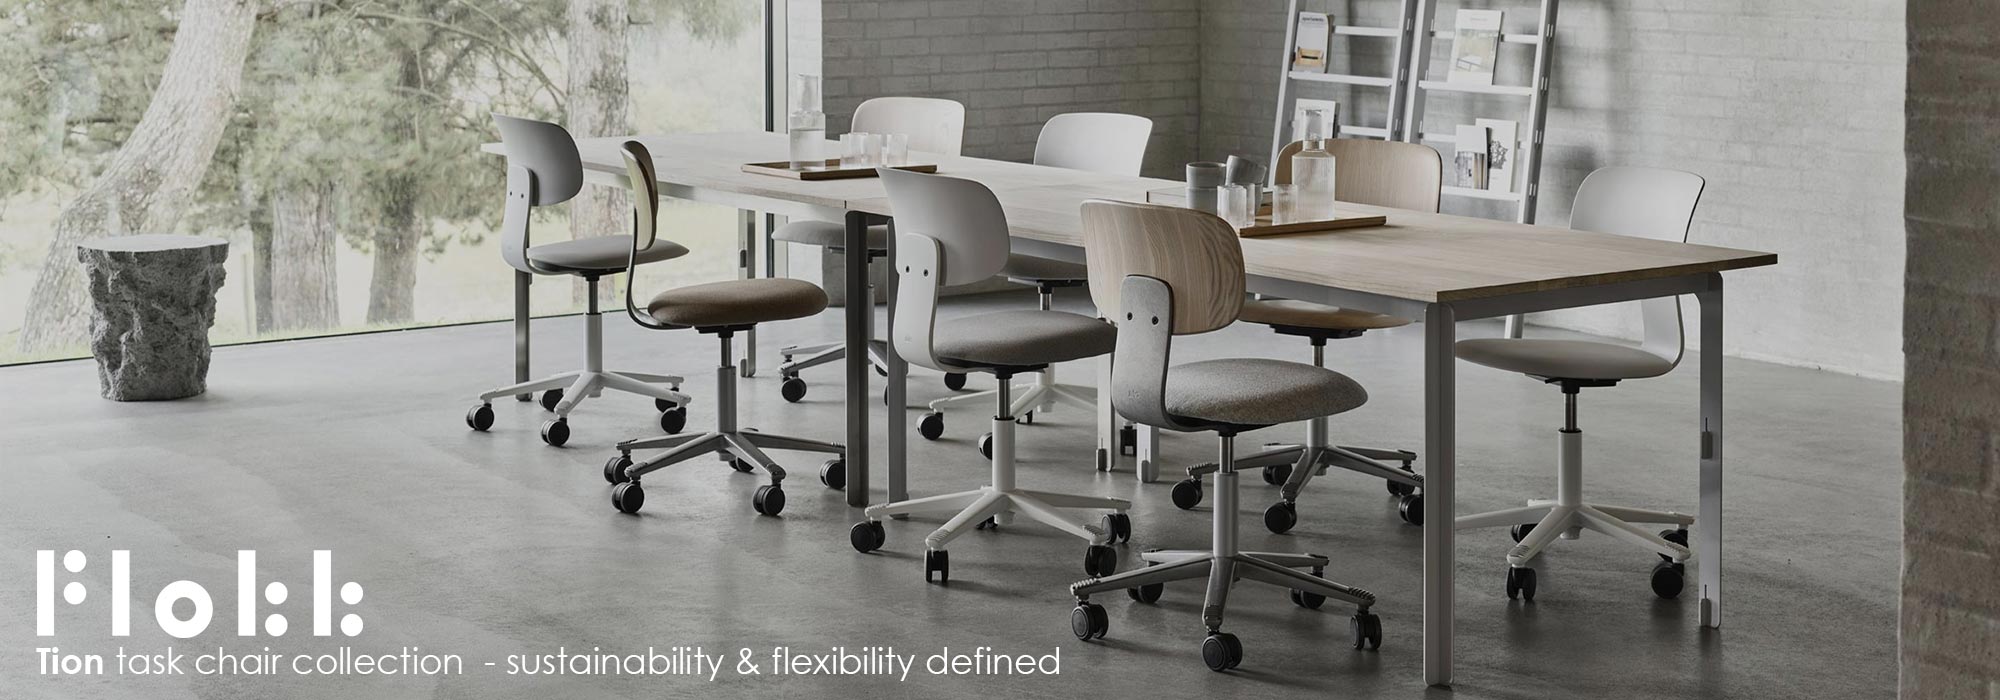 HAG Tion Task Chair Collection from Flokk